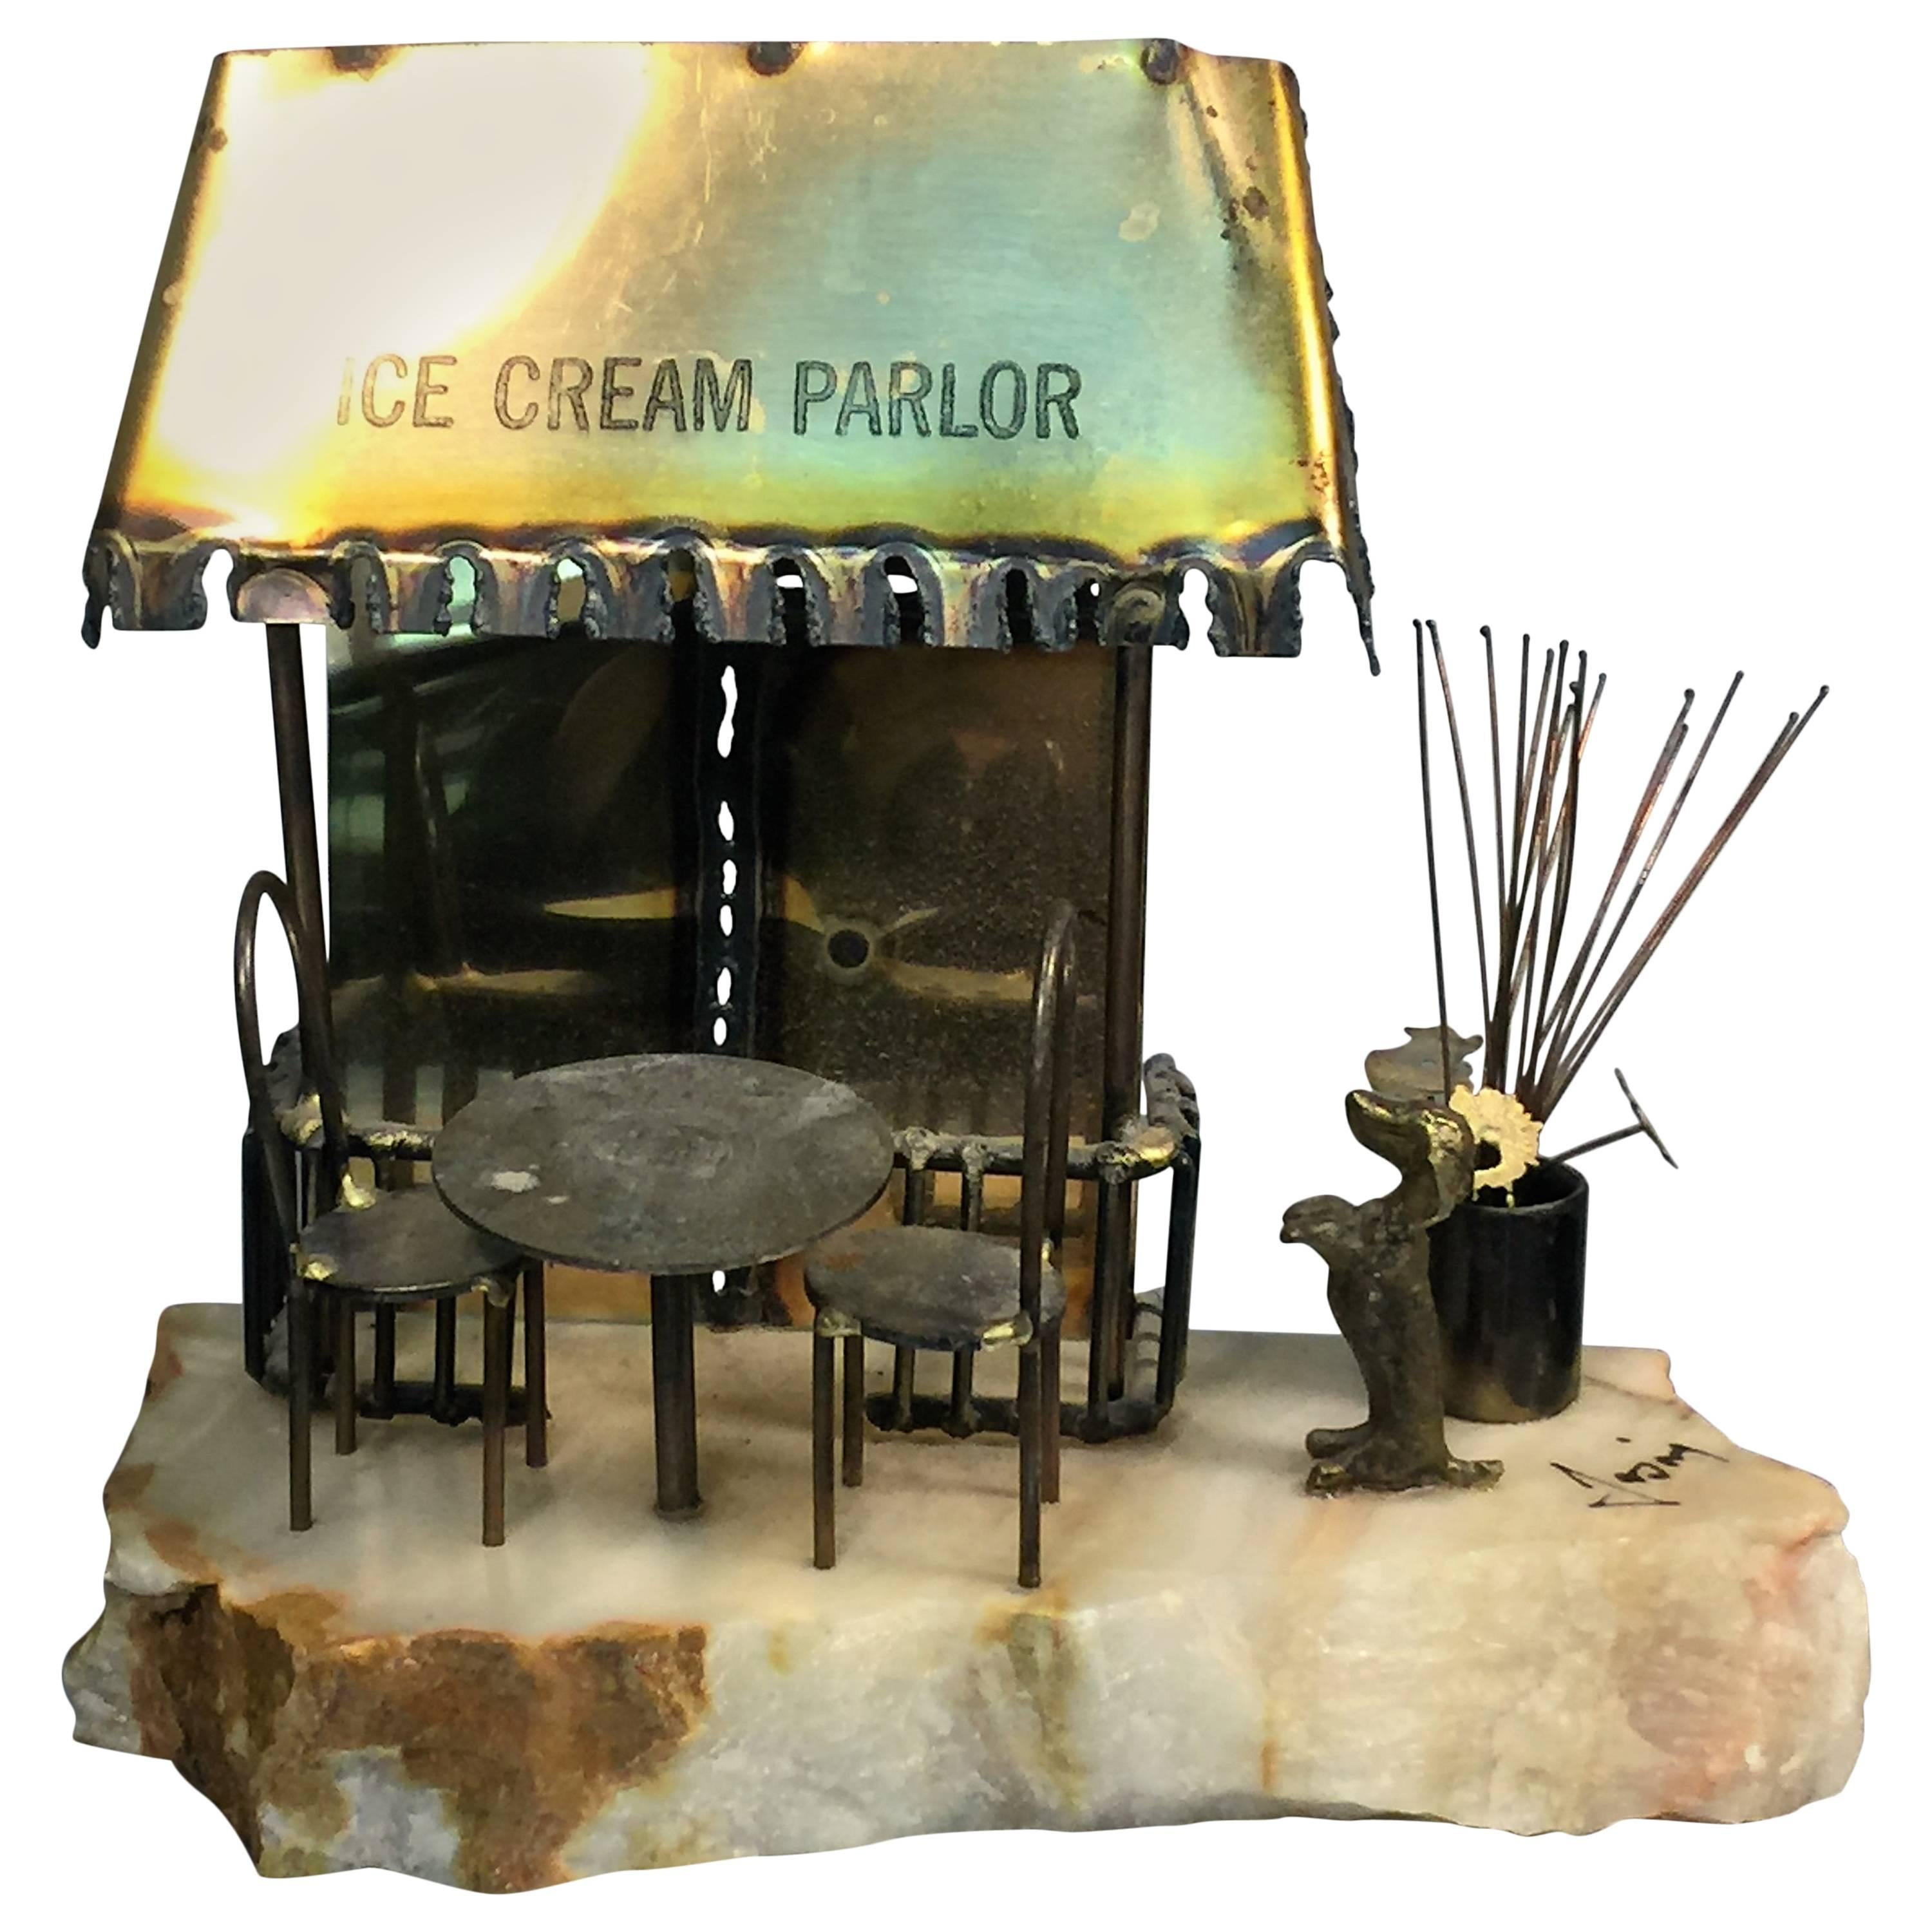 Brutalist Ice Cream Parlor Sculpture on Jagged Onyx Base For Sale